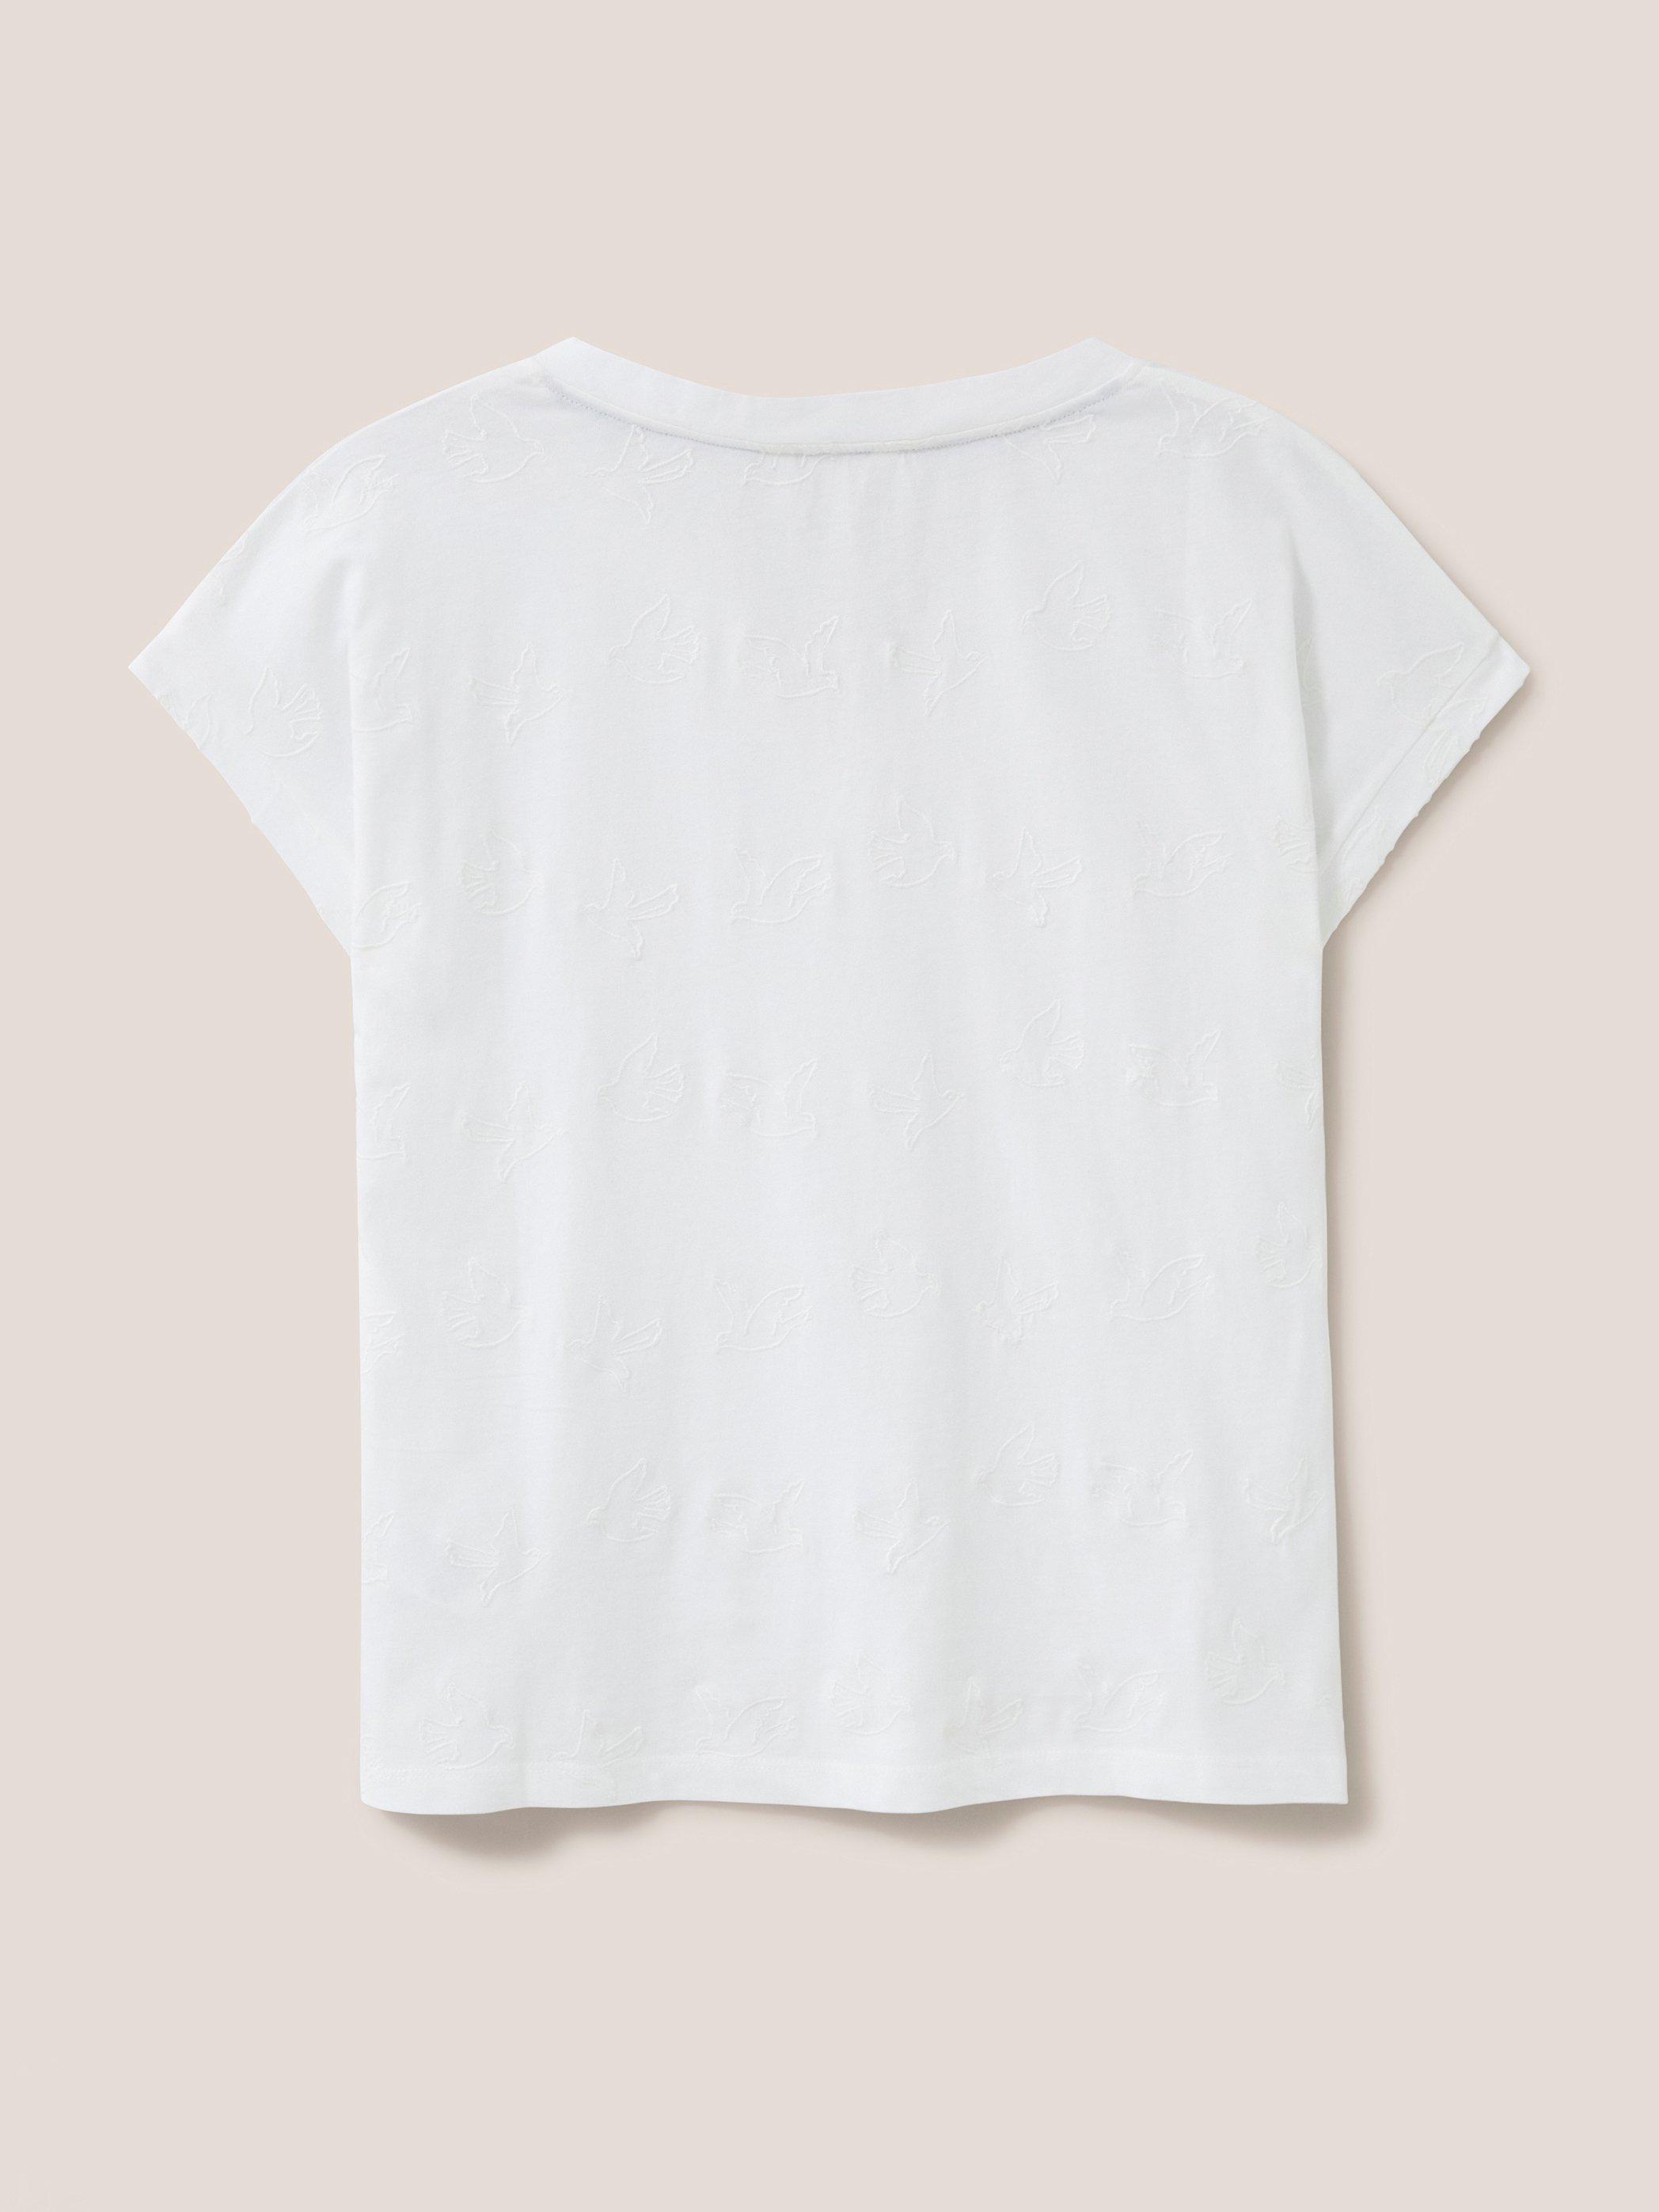 Nelly Embroidered Tee in NAT WHITE - FLAT BACK